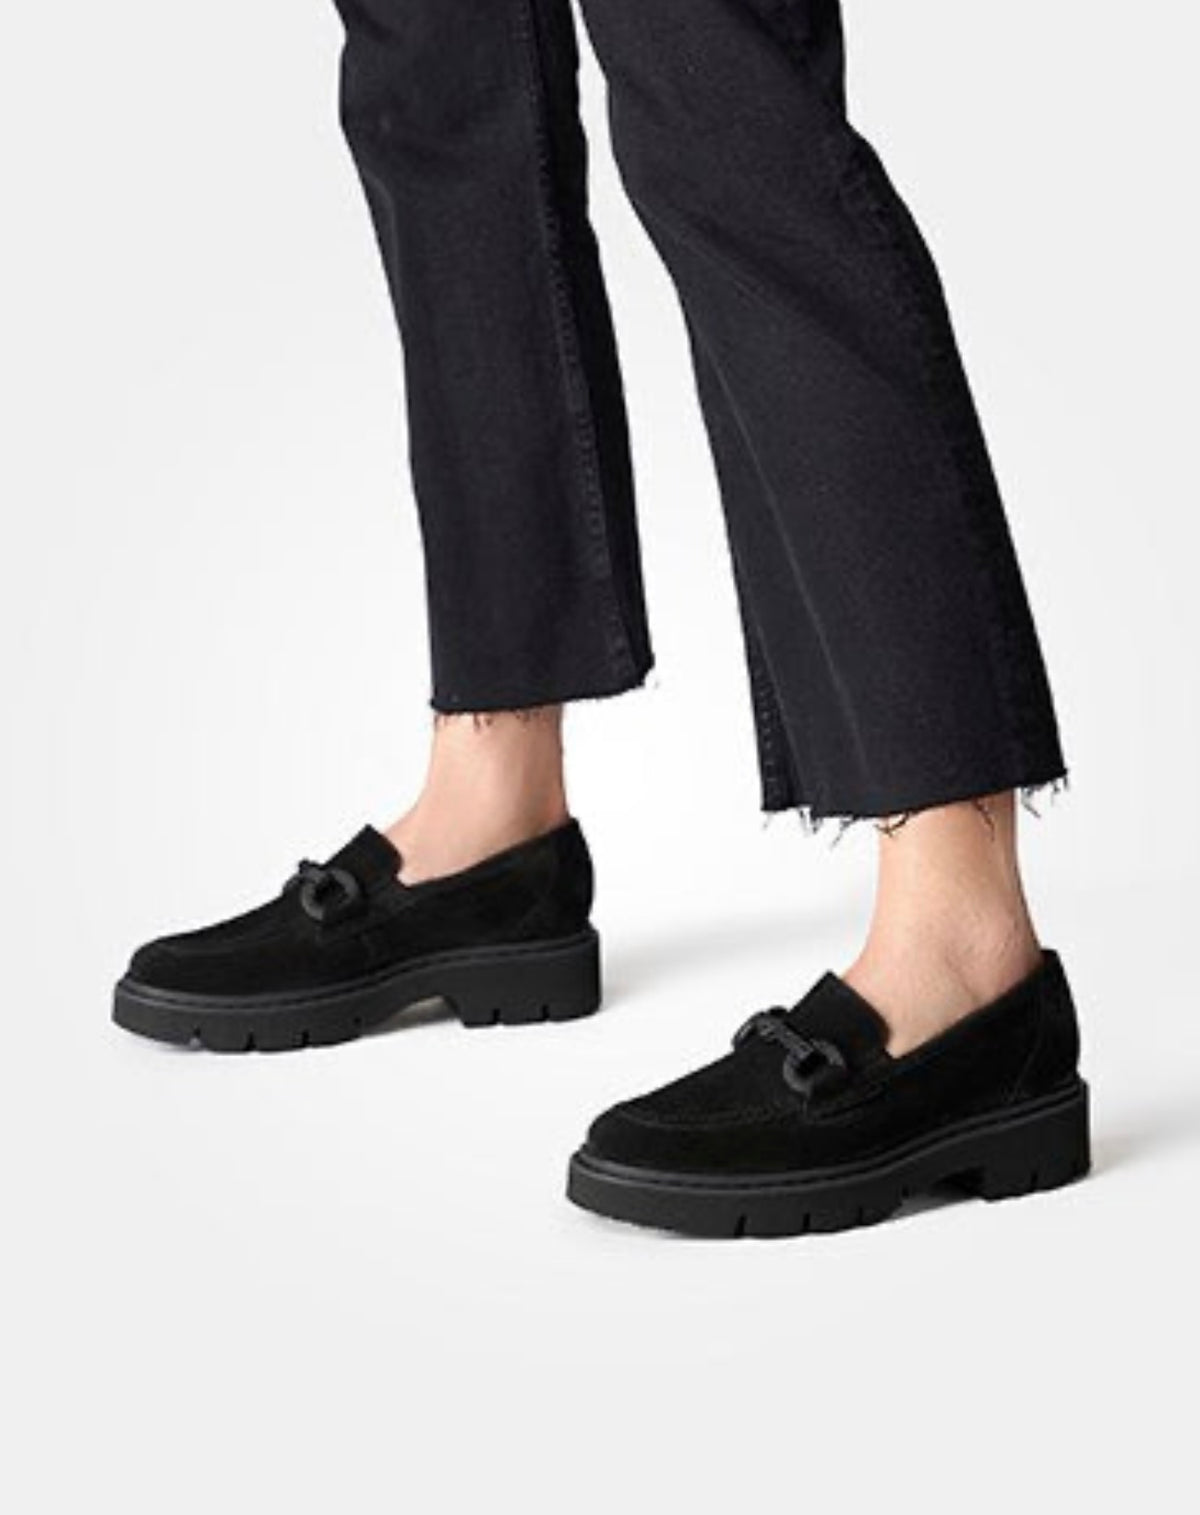 Paul Green Black Suede Loafer with Front Clasp 1043-014